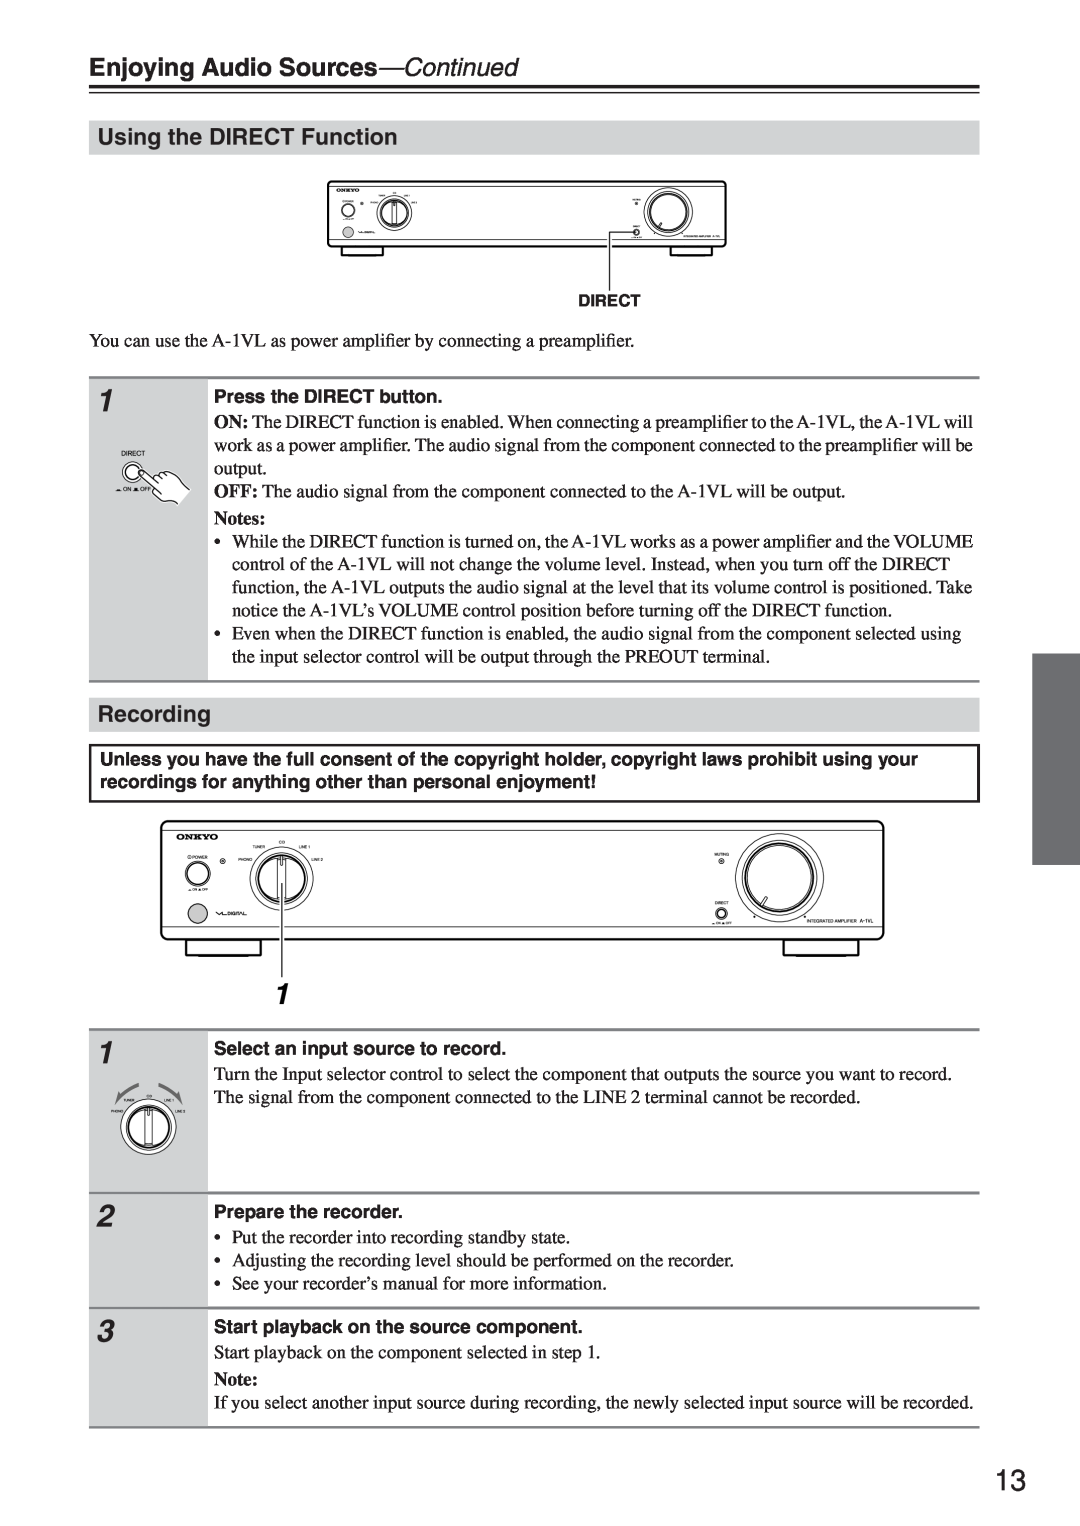 Onkyo A-1VL instruction manual Enjoying Audio Sources-Continued, Using the DIRECT Function, Recording 